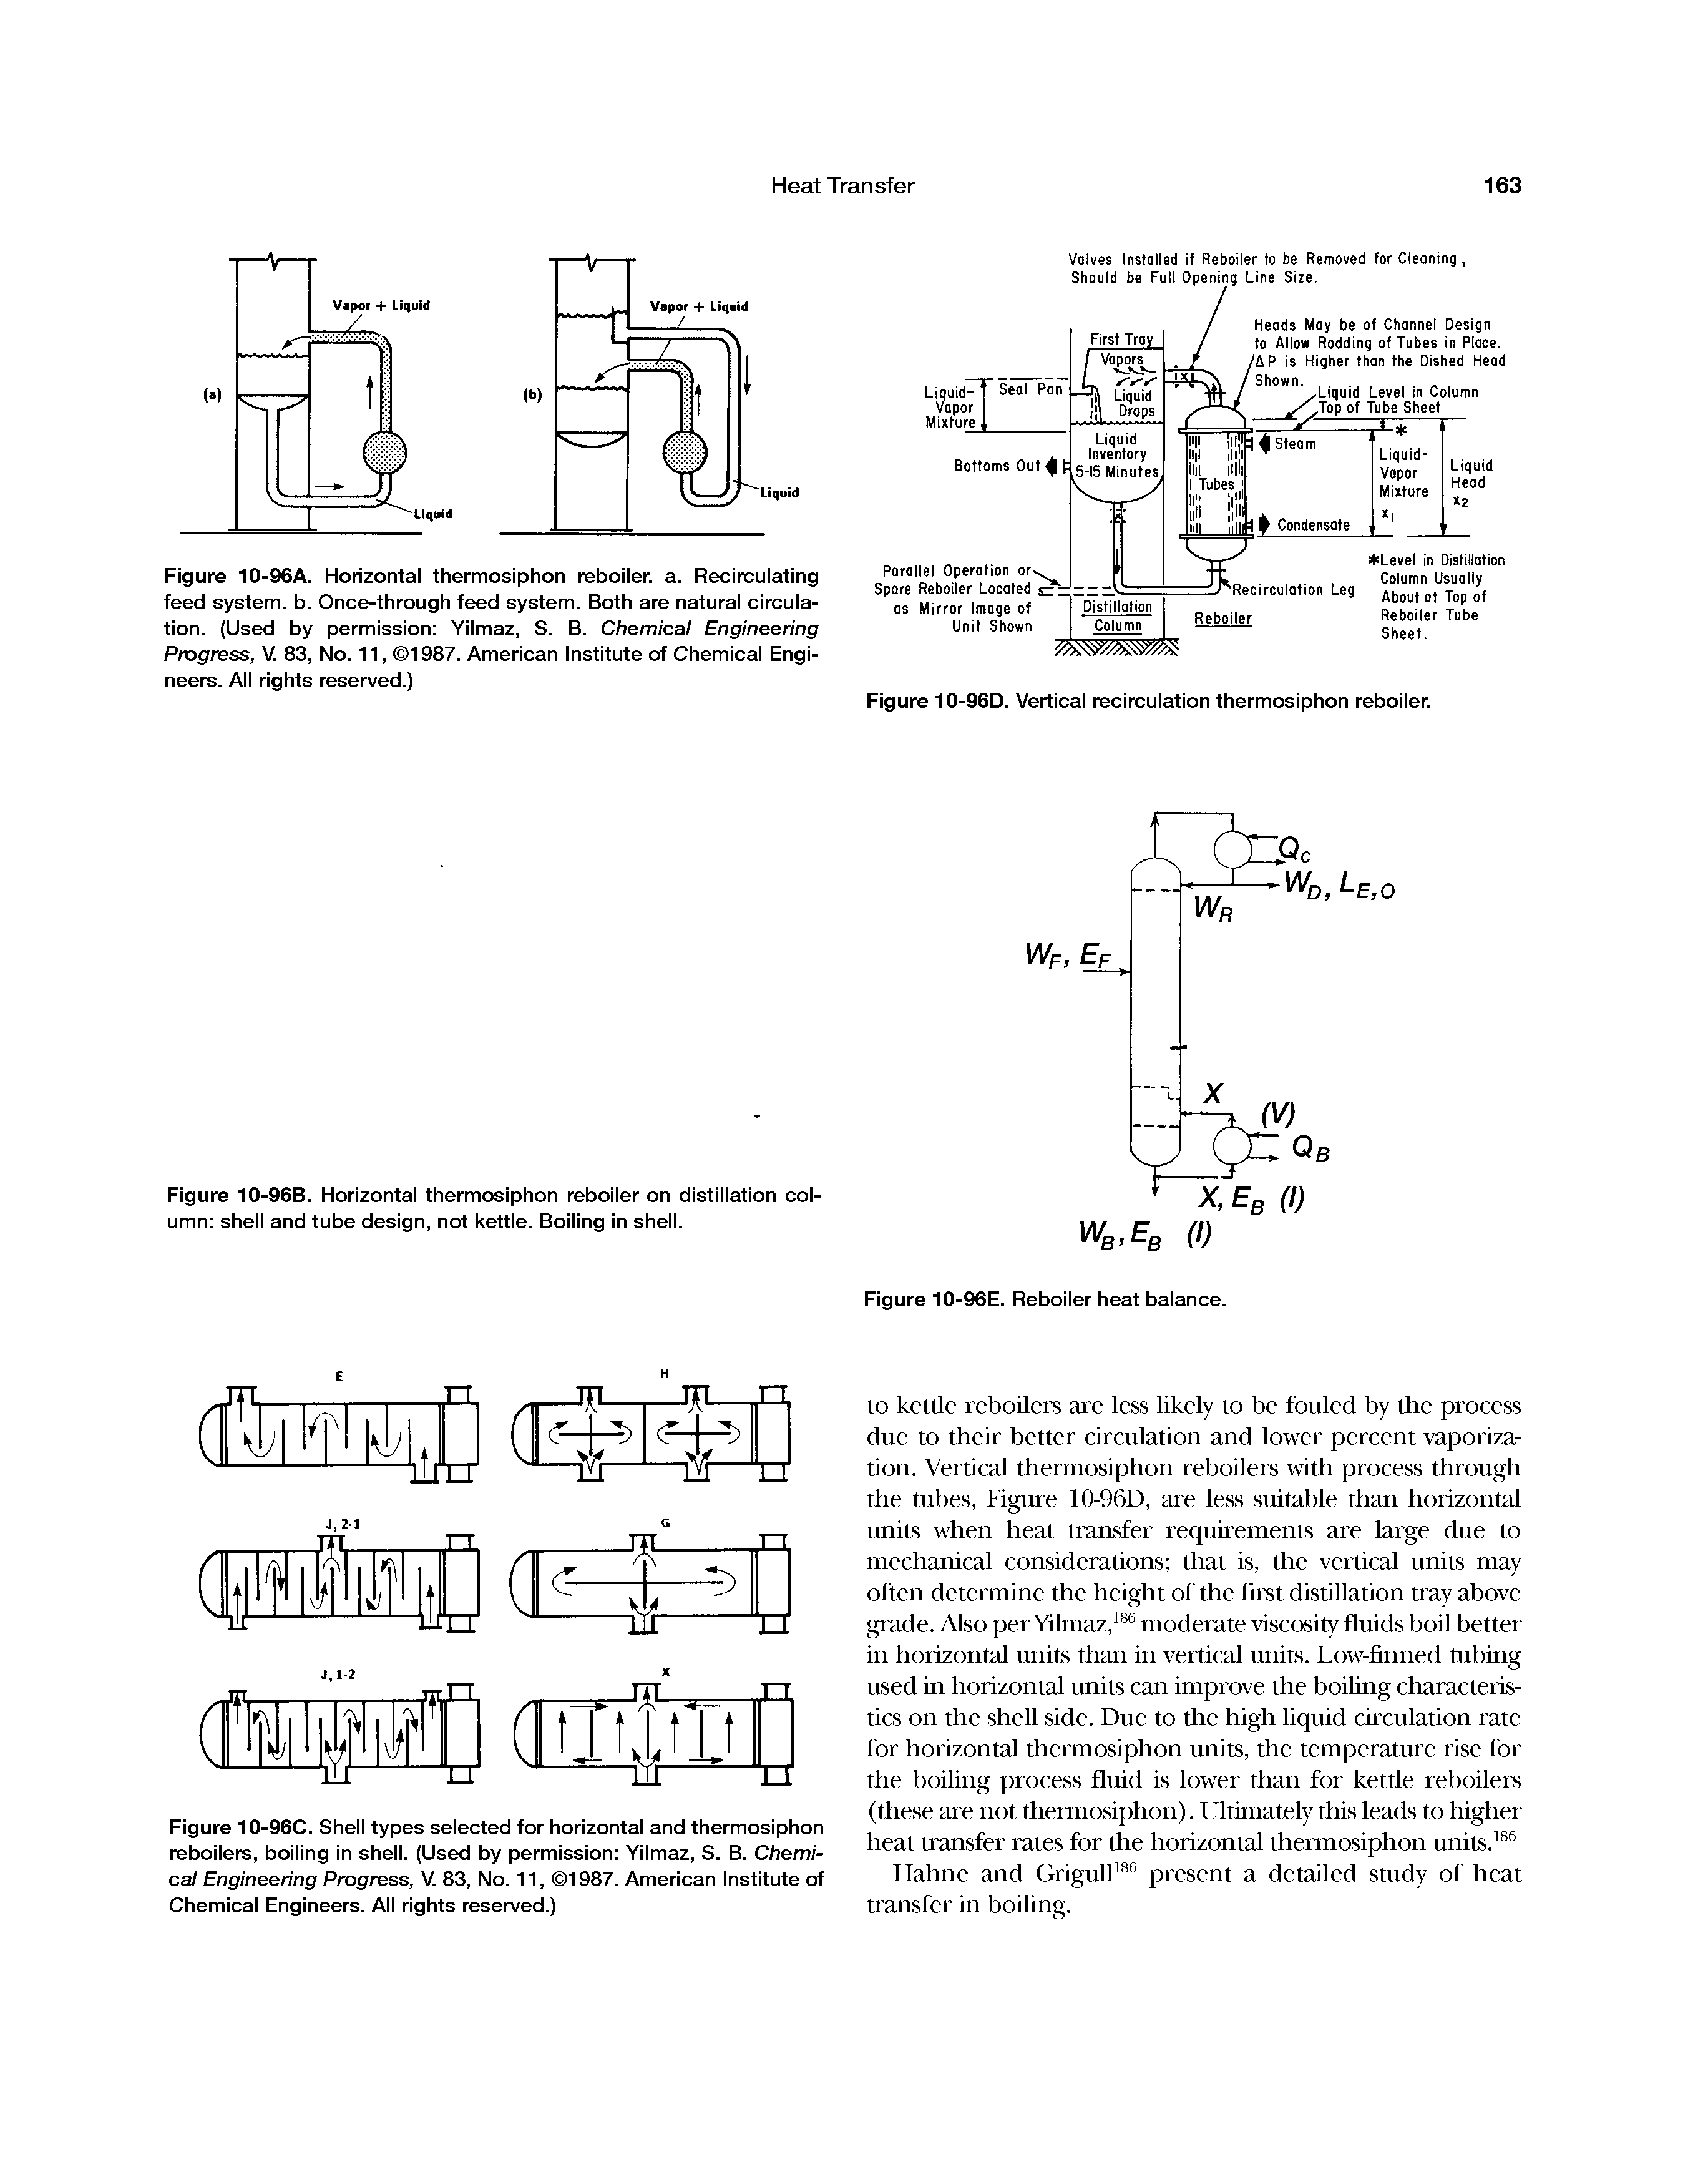 Figure 10-96A. Horizontal thermosiphon reboiler, a. Recirculating feed system, b. Once-through feed system. Both are natural circulation. (Used by permission Yilmaz, S. B. Chemical Engineering Progress, V. 83, No. 11, 1987. American Institute of Chemical Engineers. All rights reserved.)...